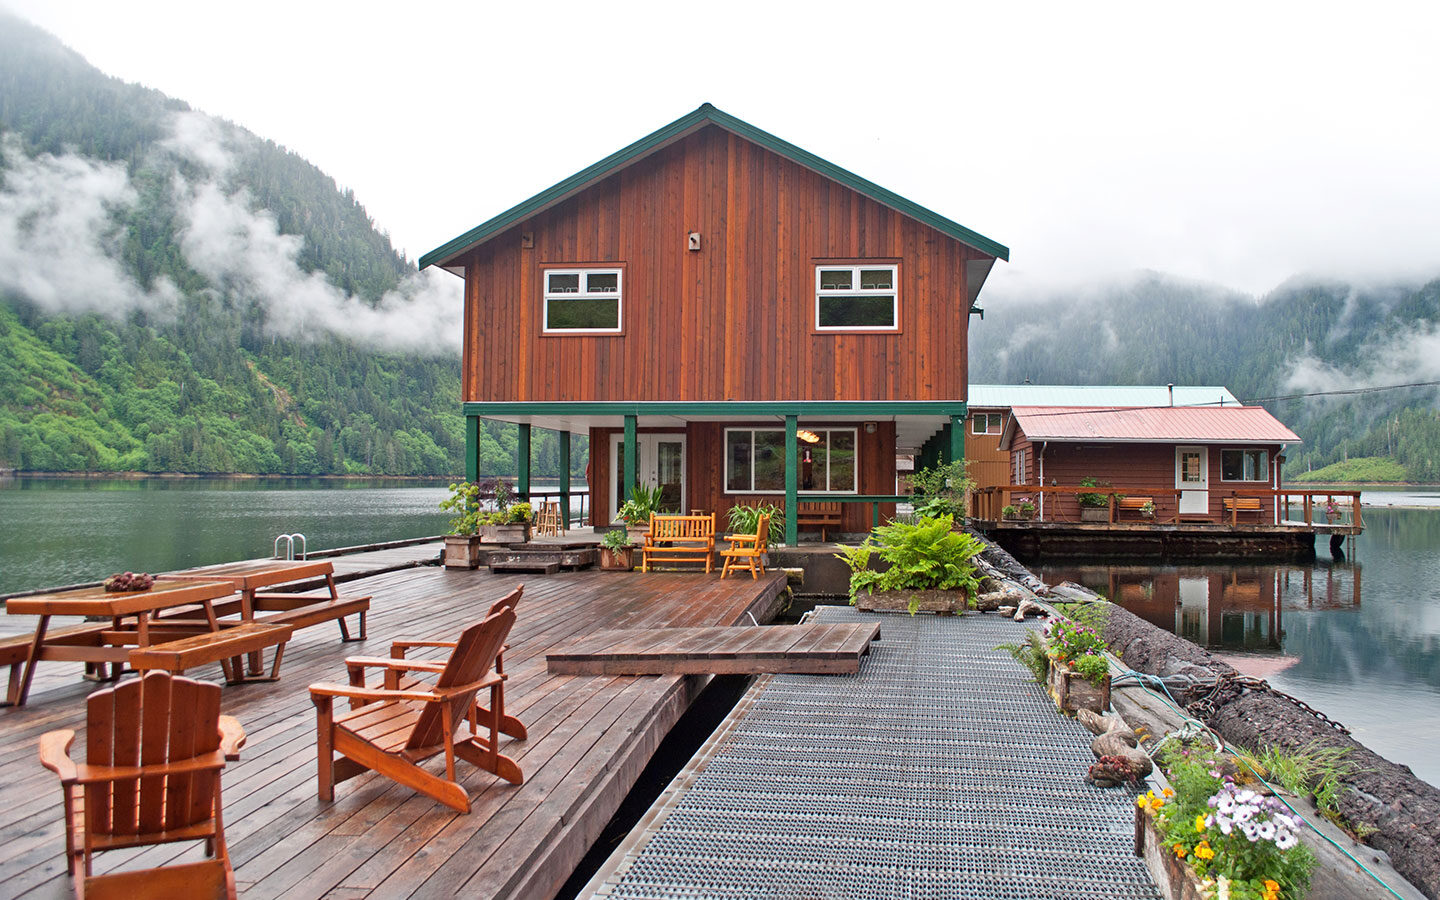 Deck at the Great Bear Lodge who run grizzly bear tours in British Columbia